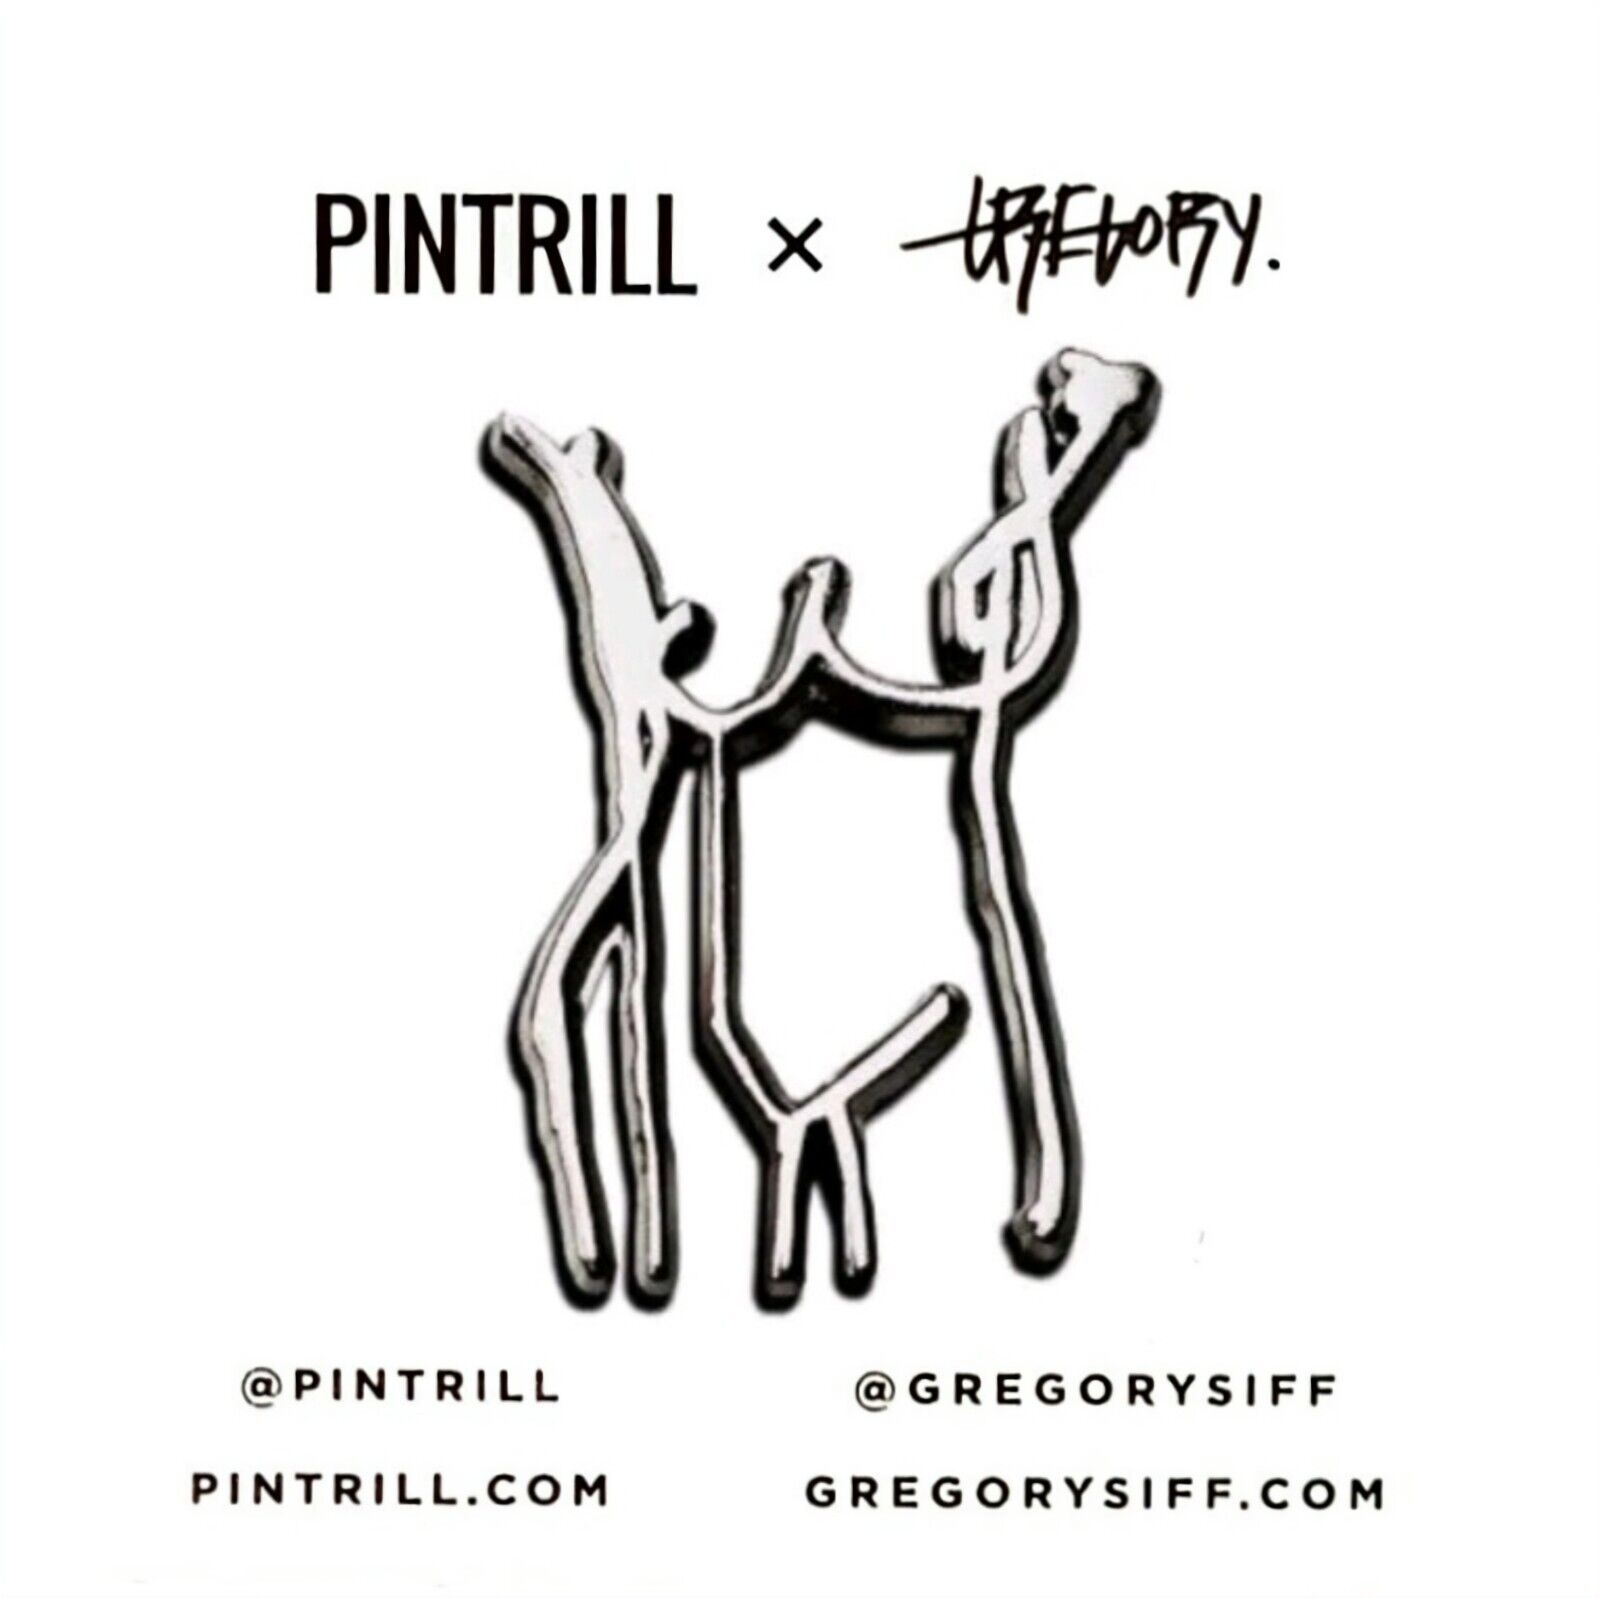 ⚡️RARE⚡️ PINTRILL x GREGORY SIFF NEW YORK PIN *BRAND NEW* 2017 LIMITED EDITION